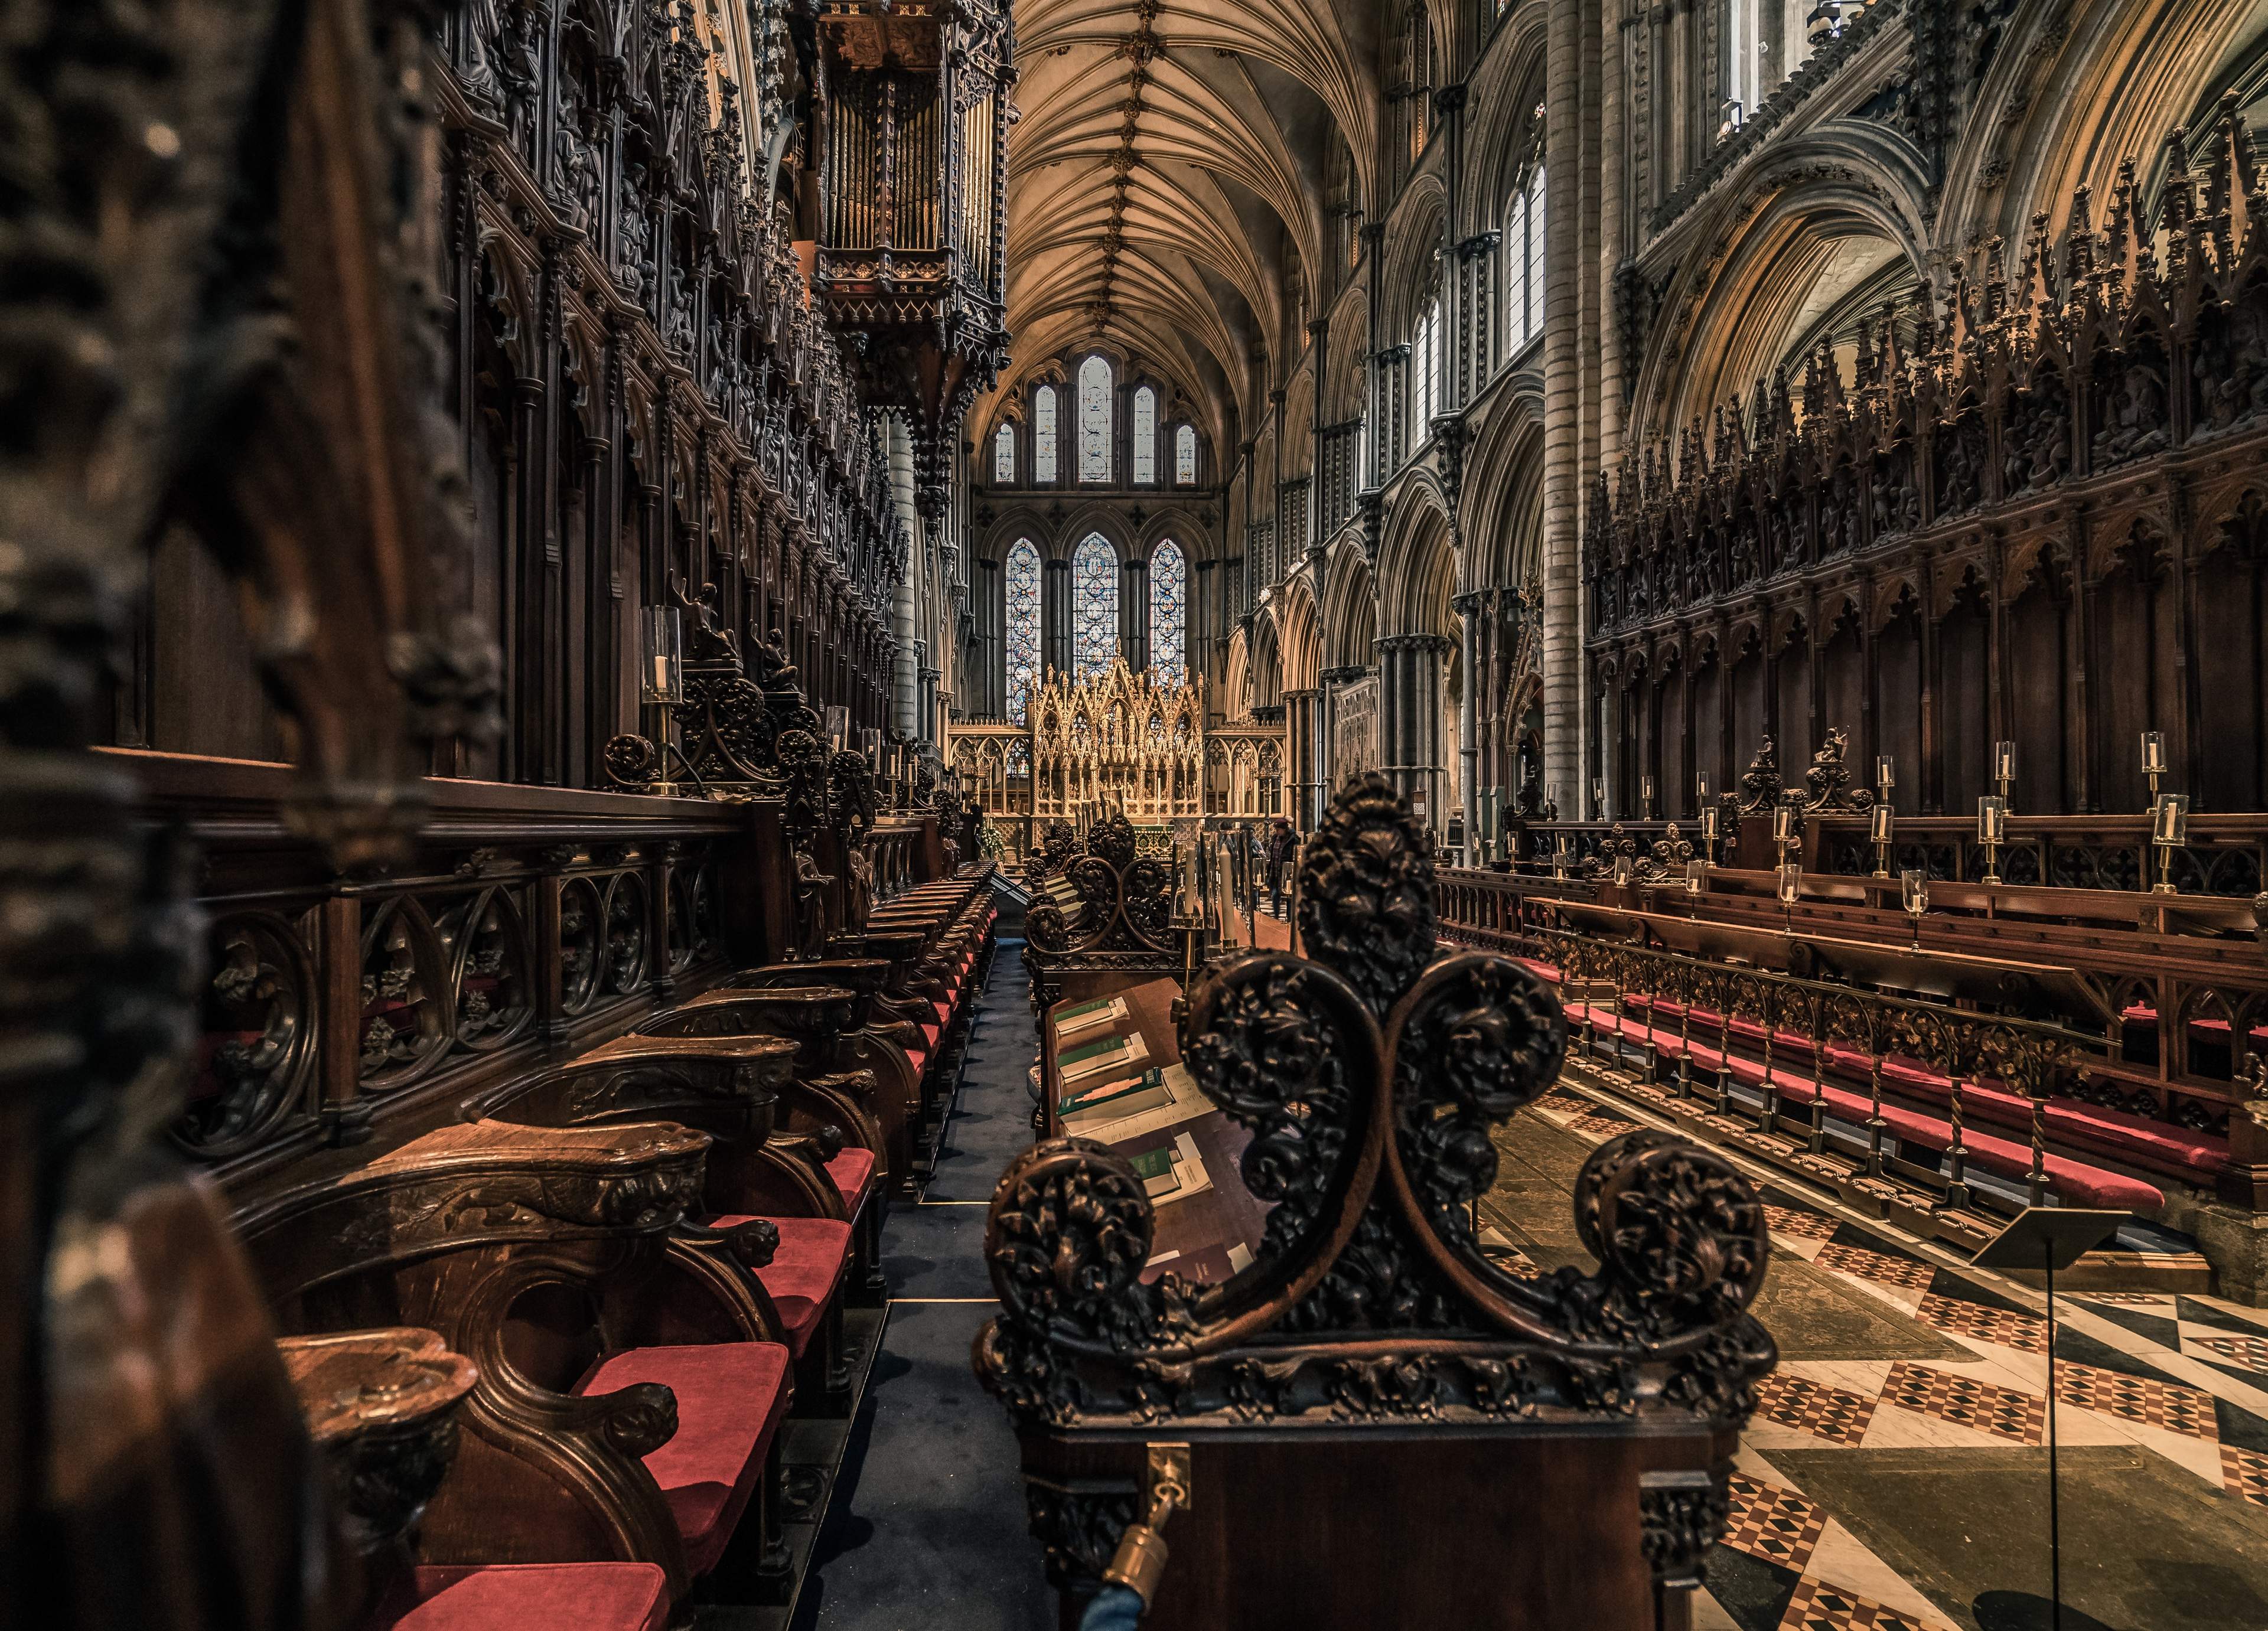 The Choir of Ely Cathedral, Ely, Cambridgeshire, UK